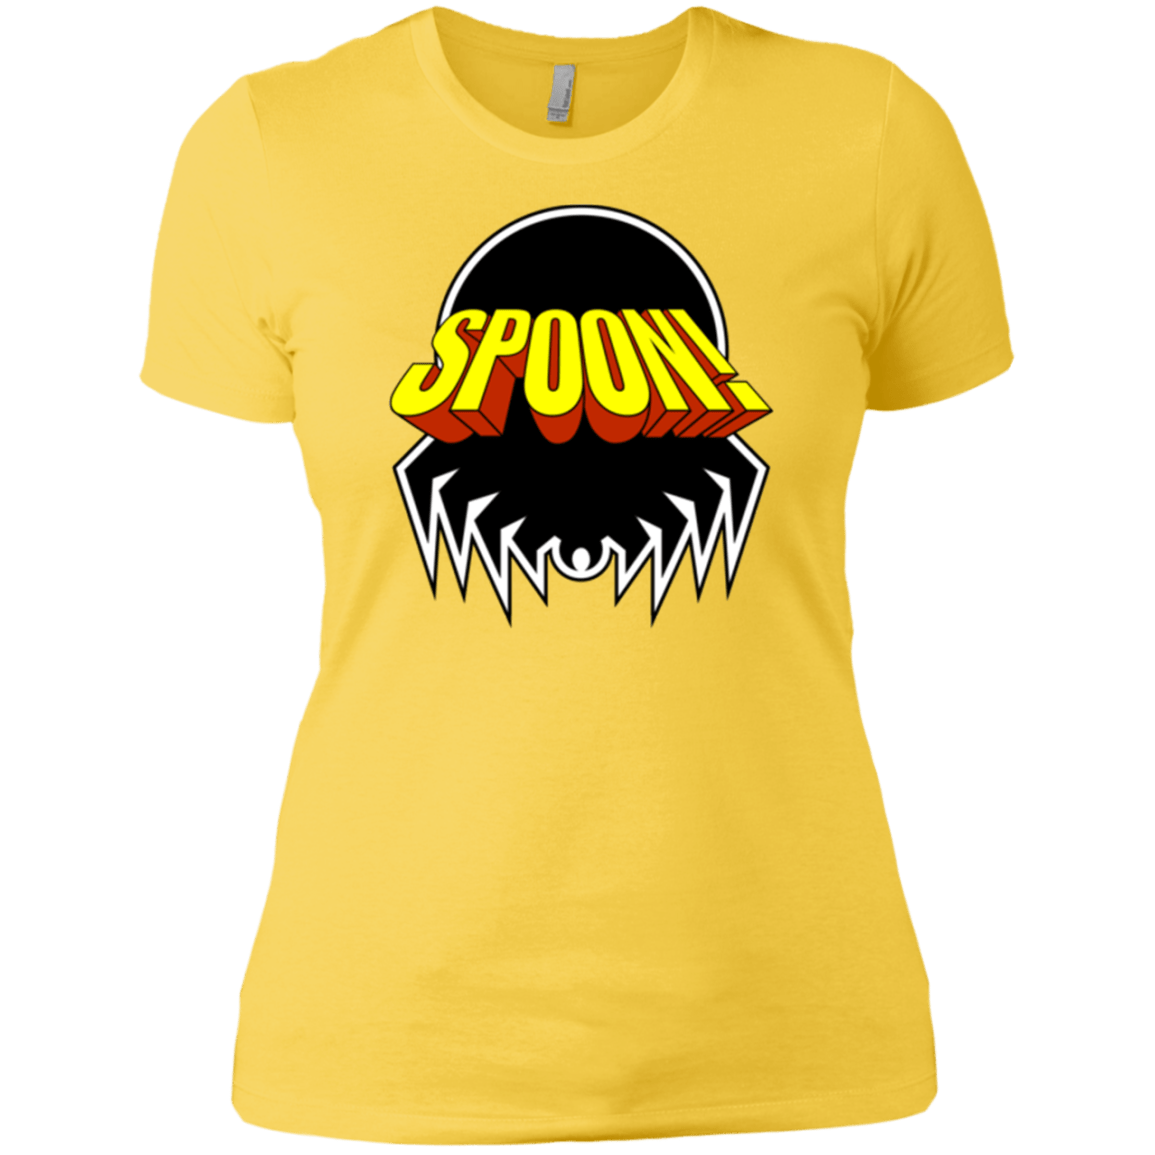 T-Shirts Vibrant Yellow / X-Small Honk If You Love Justice! Women's Premium T-Shirt